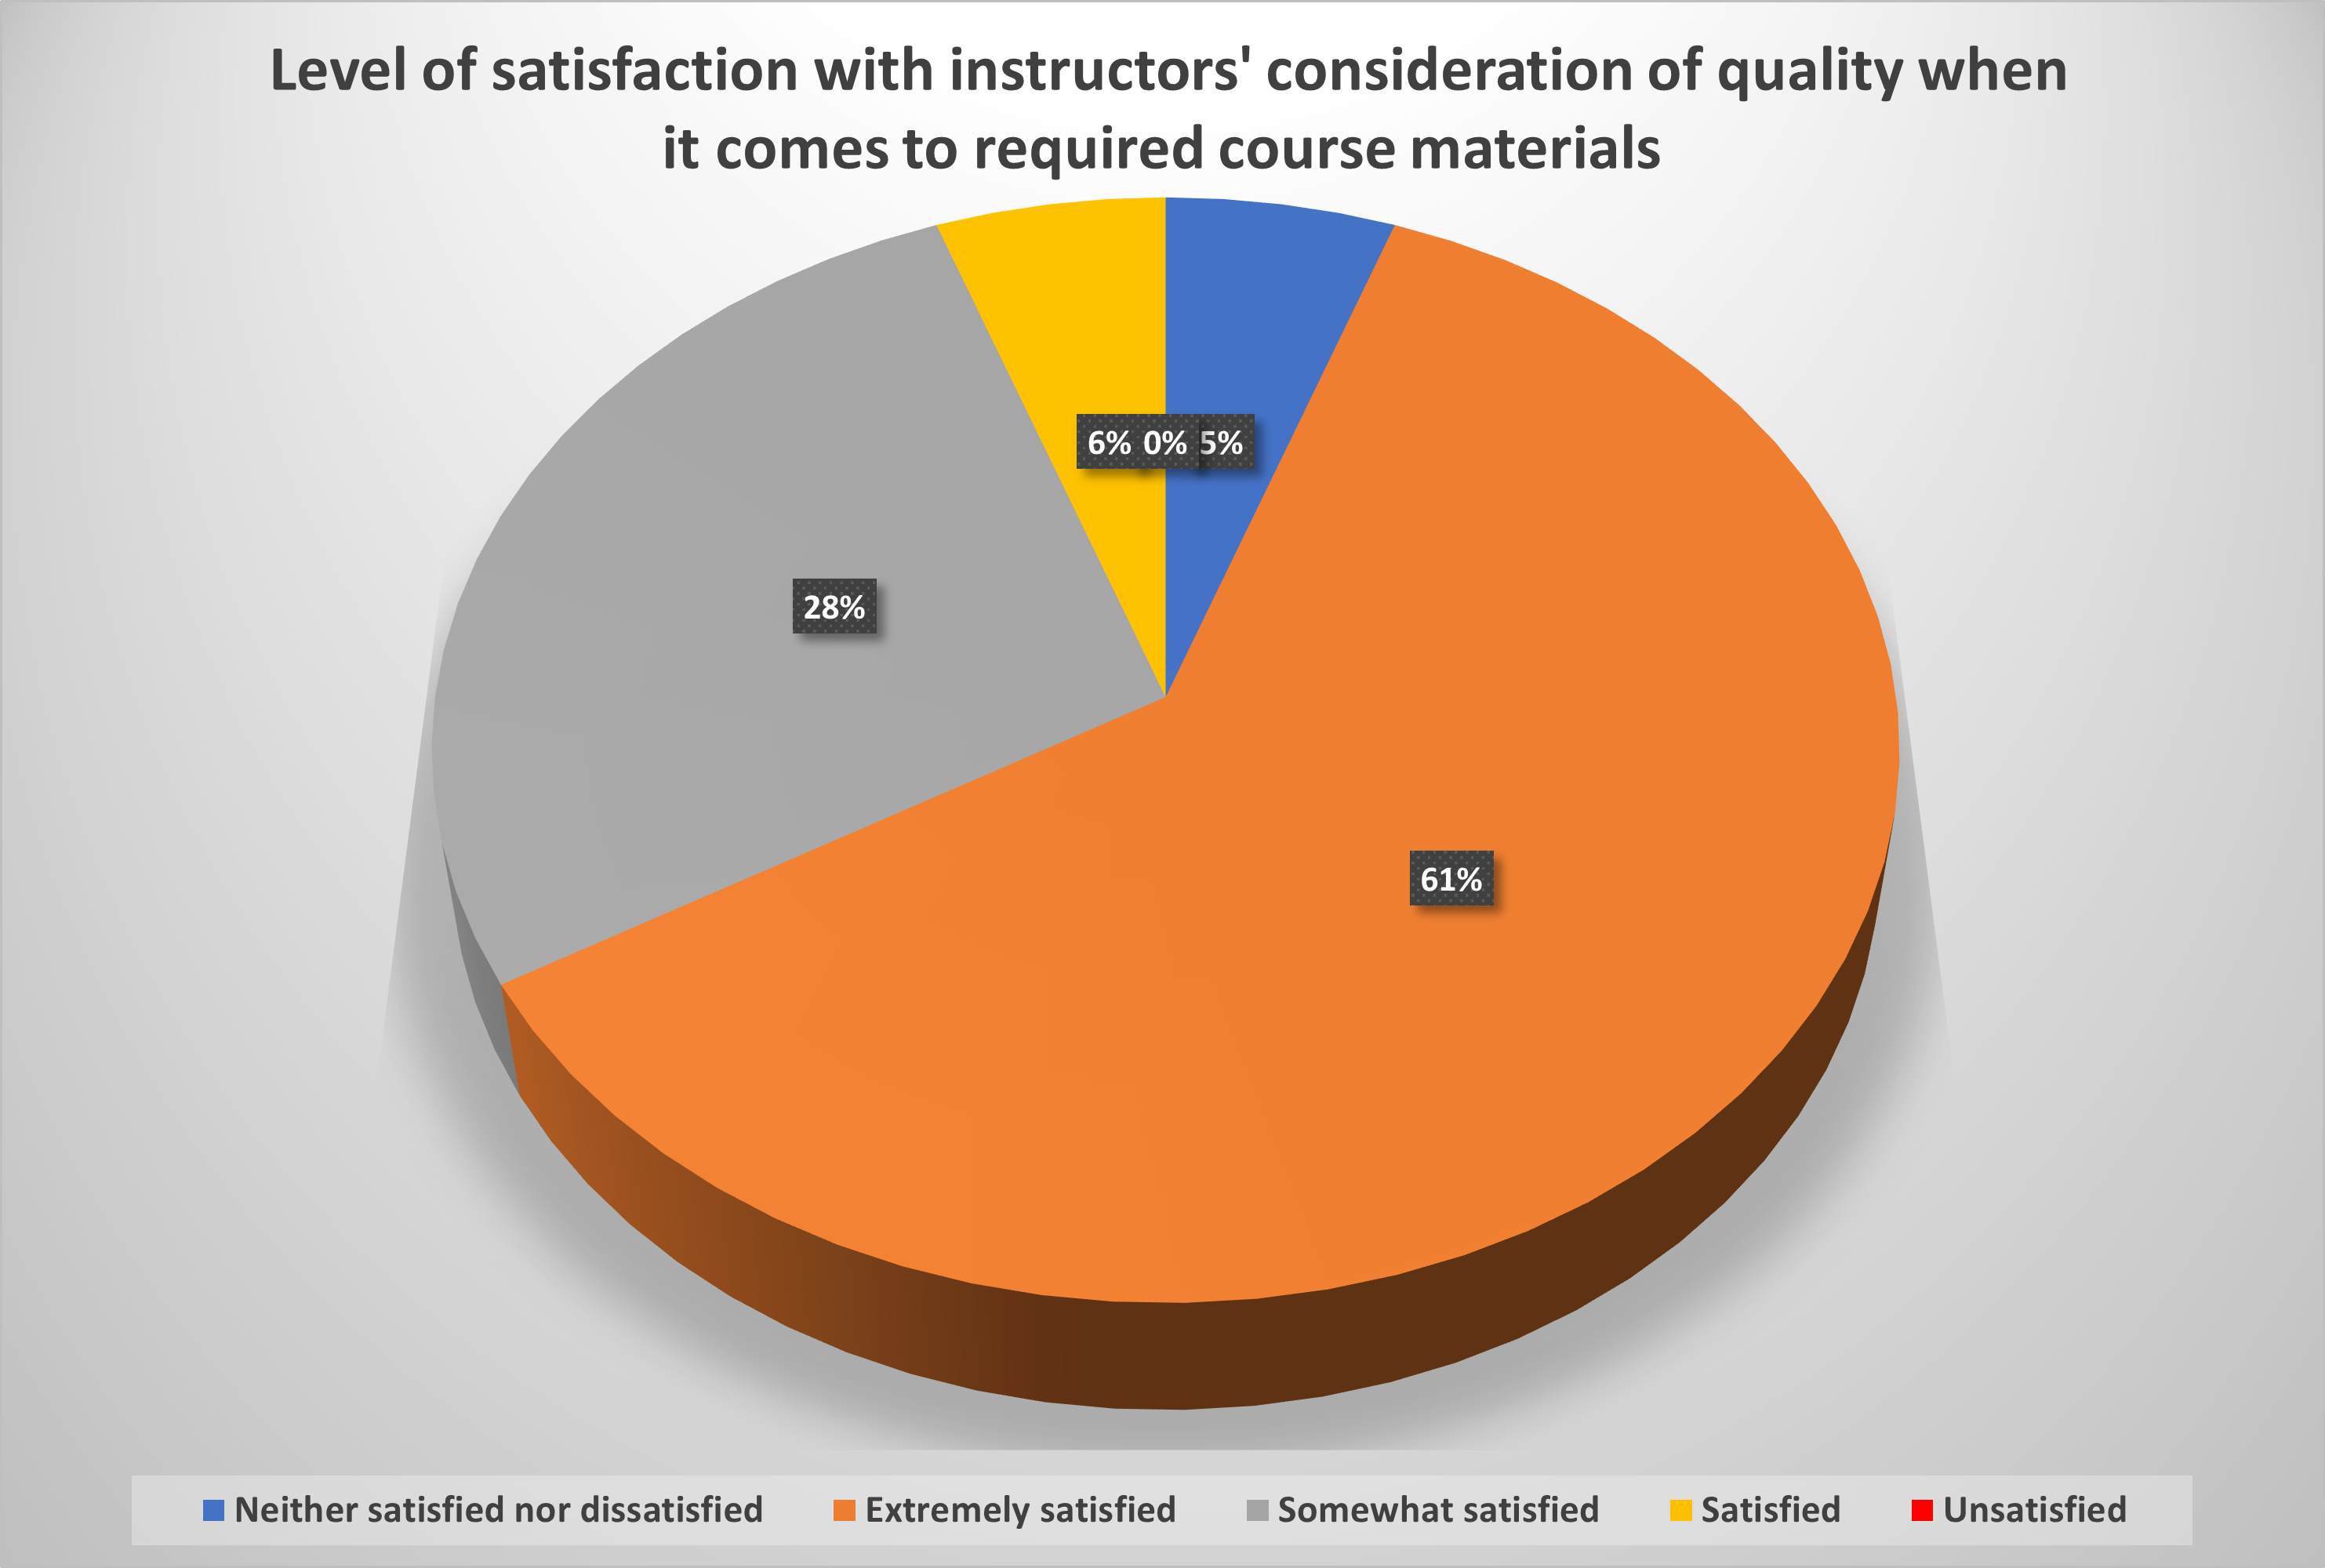 Satisfaction with instructors